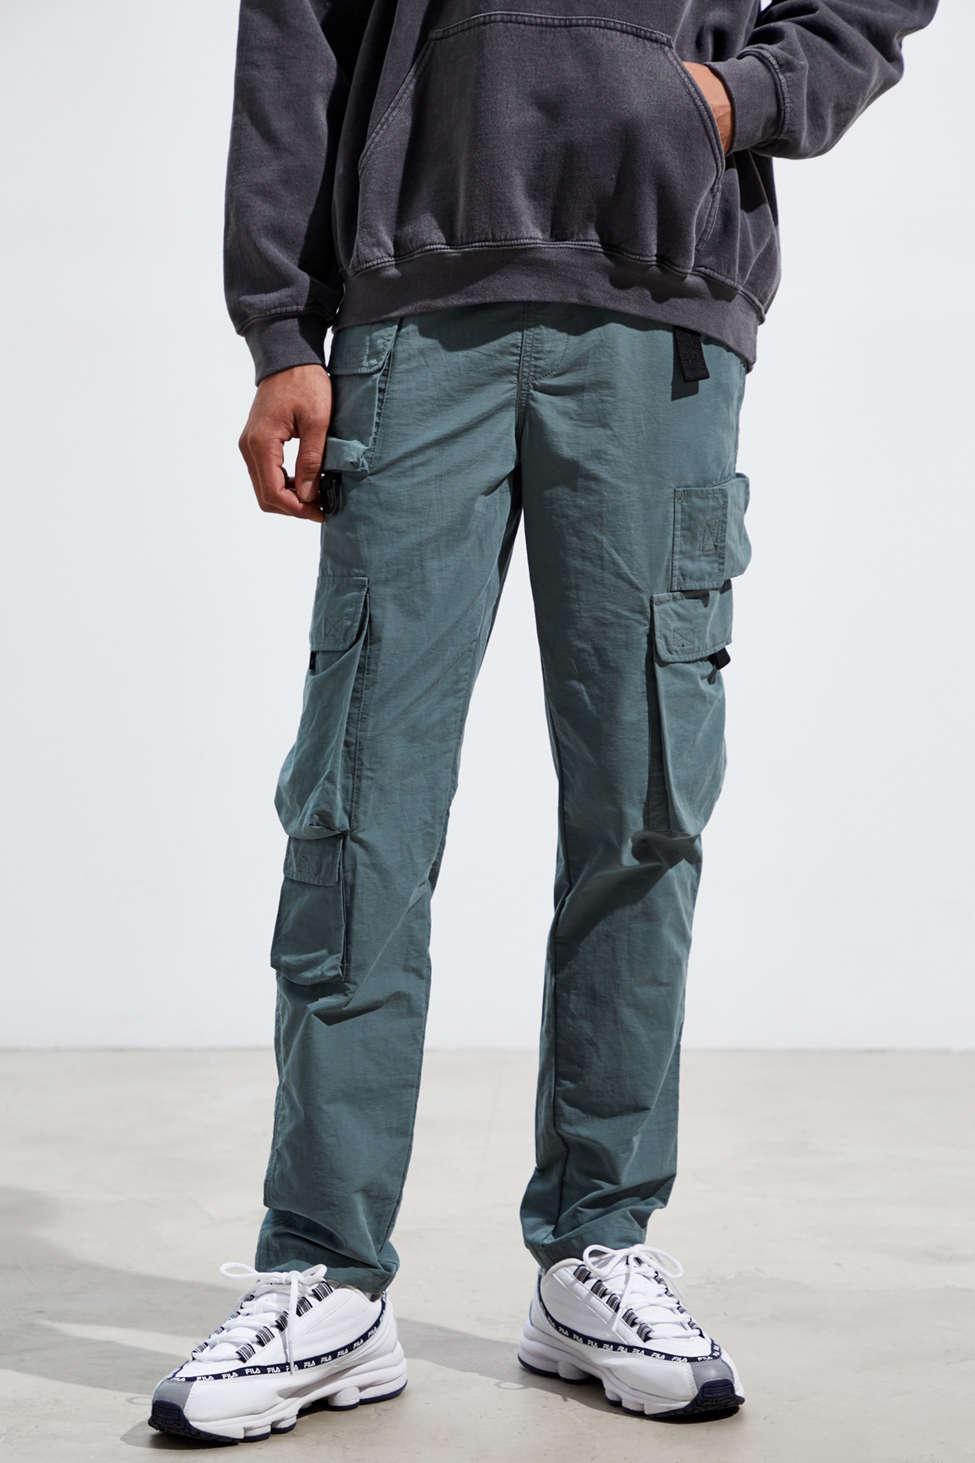 Urban Outfitters Cotton Uo Night Skinny Utility Cargo Lightweight Pant in  Dark Green (Blue) for Men - Lyst